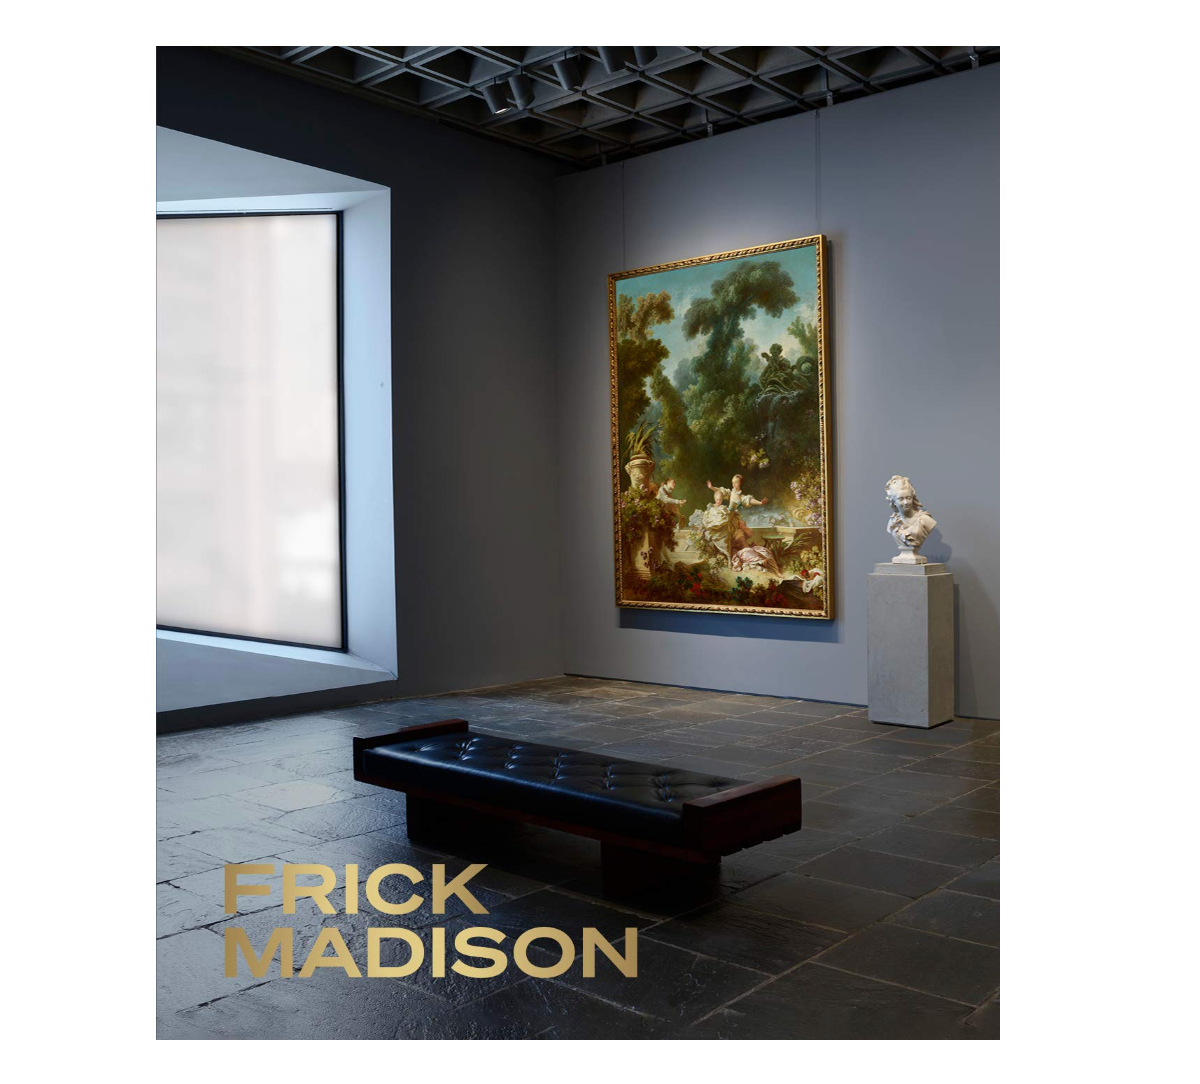 Frick Madison- The Frick Collection at the Breuer Building